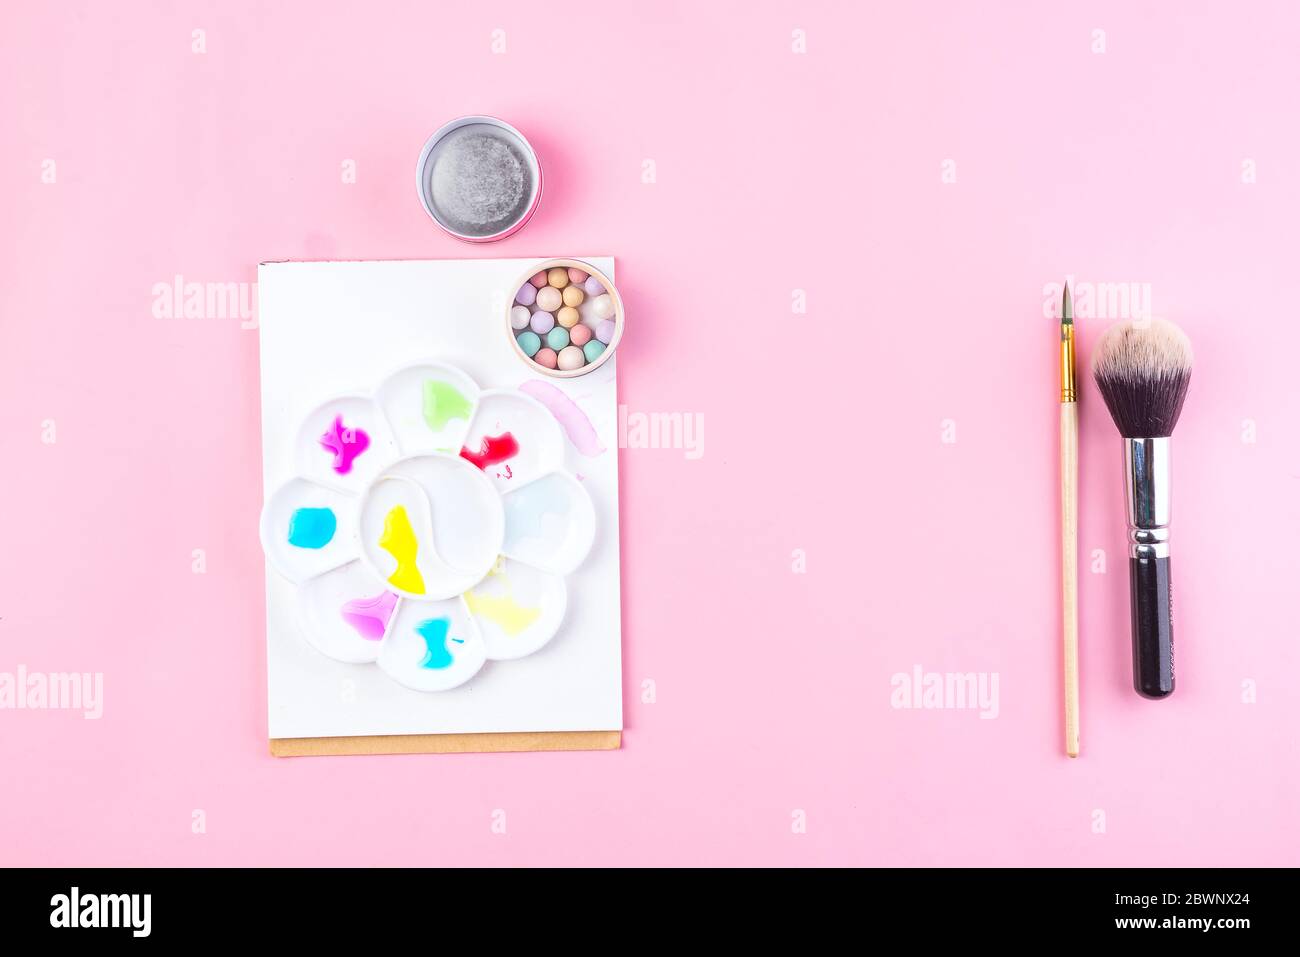 Set of colorful cosmetics powder balls, paper with watercolor stick and brushe on pink background. Makeup as art Stock Photo